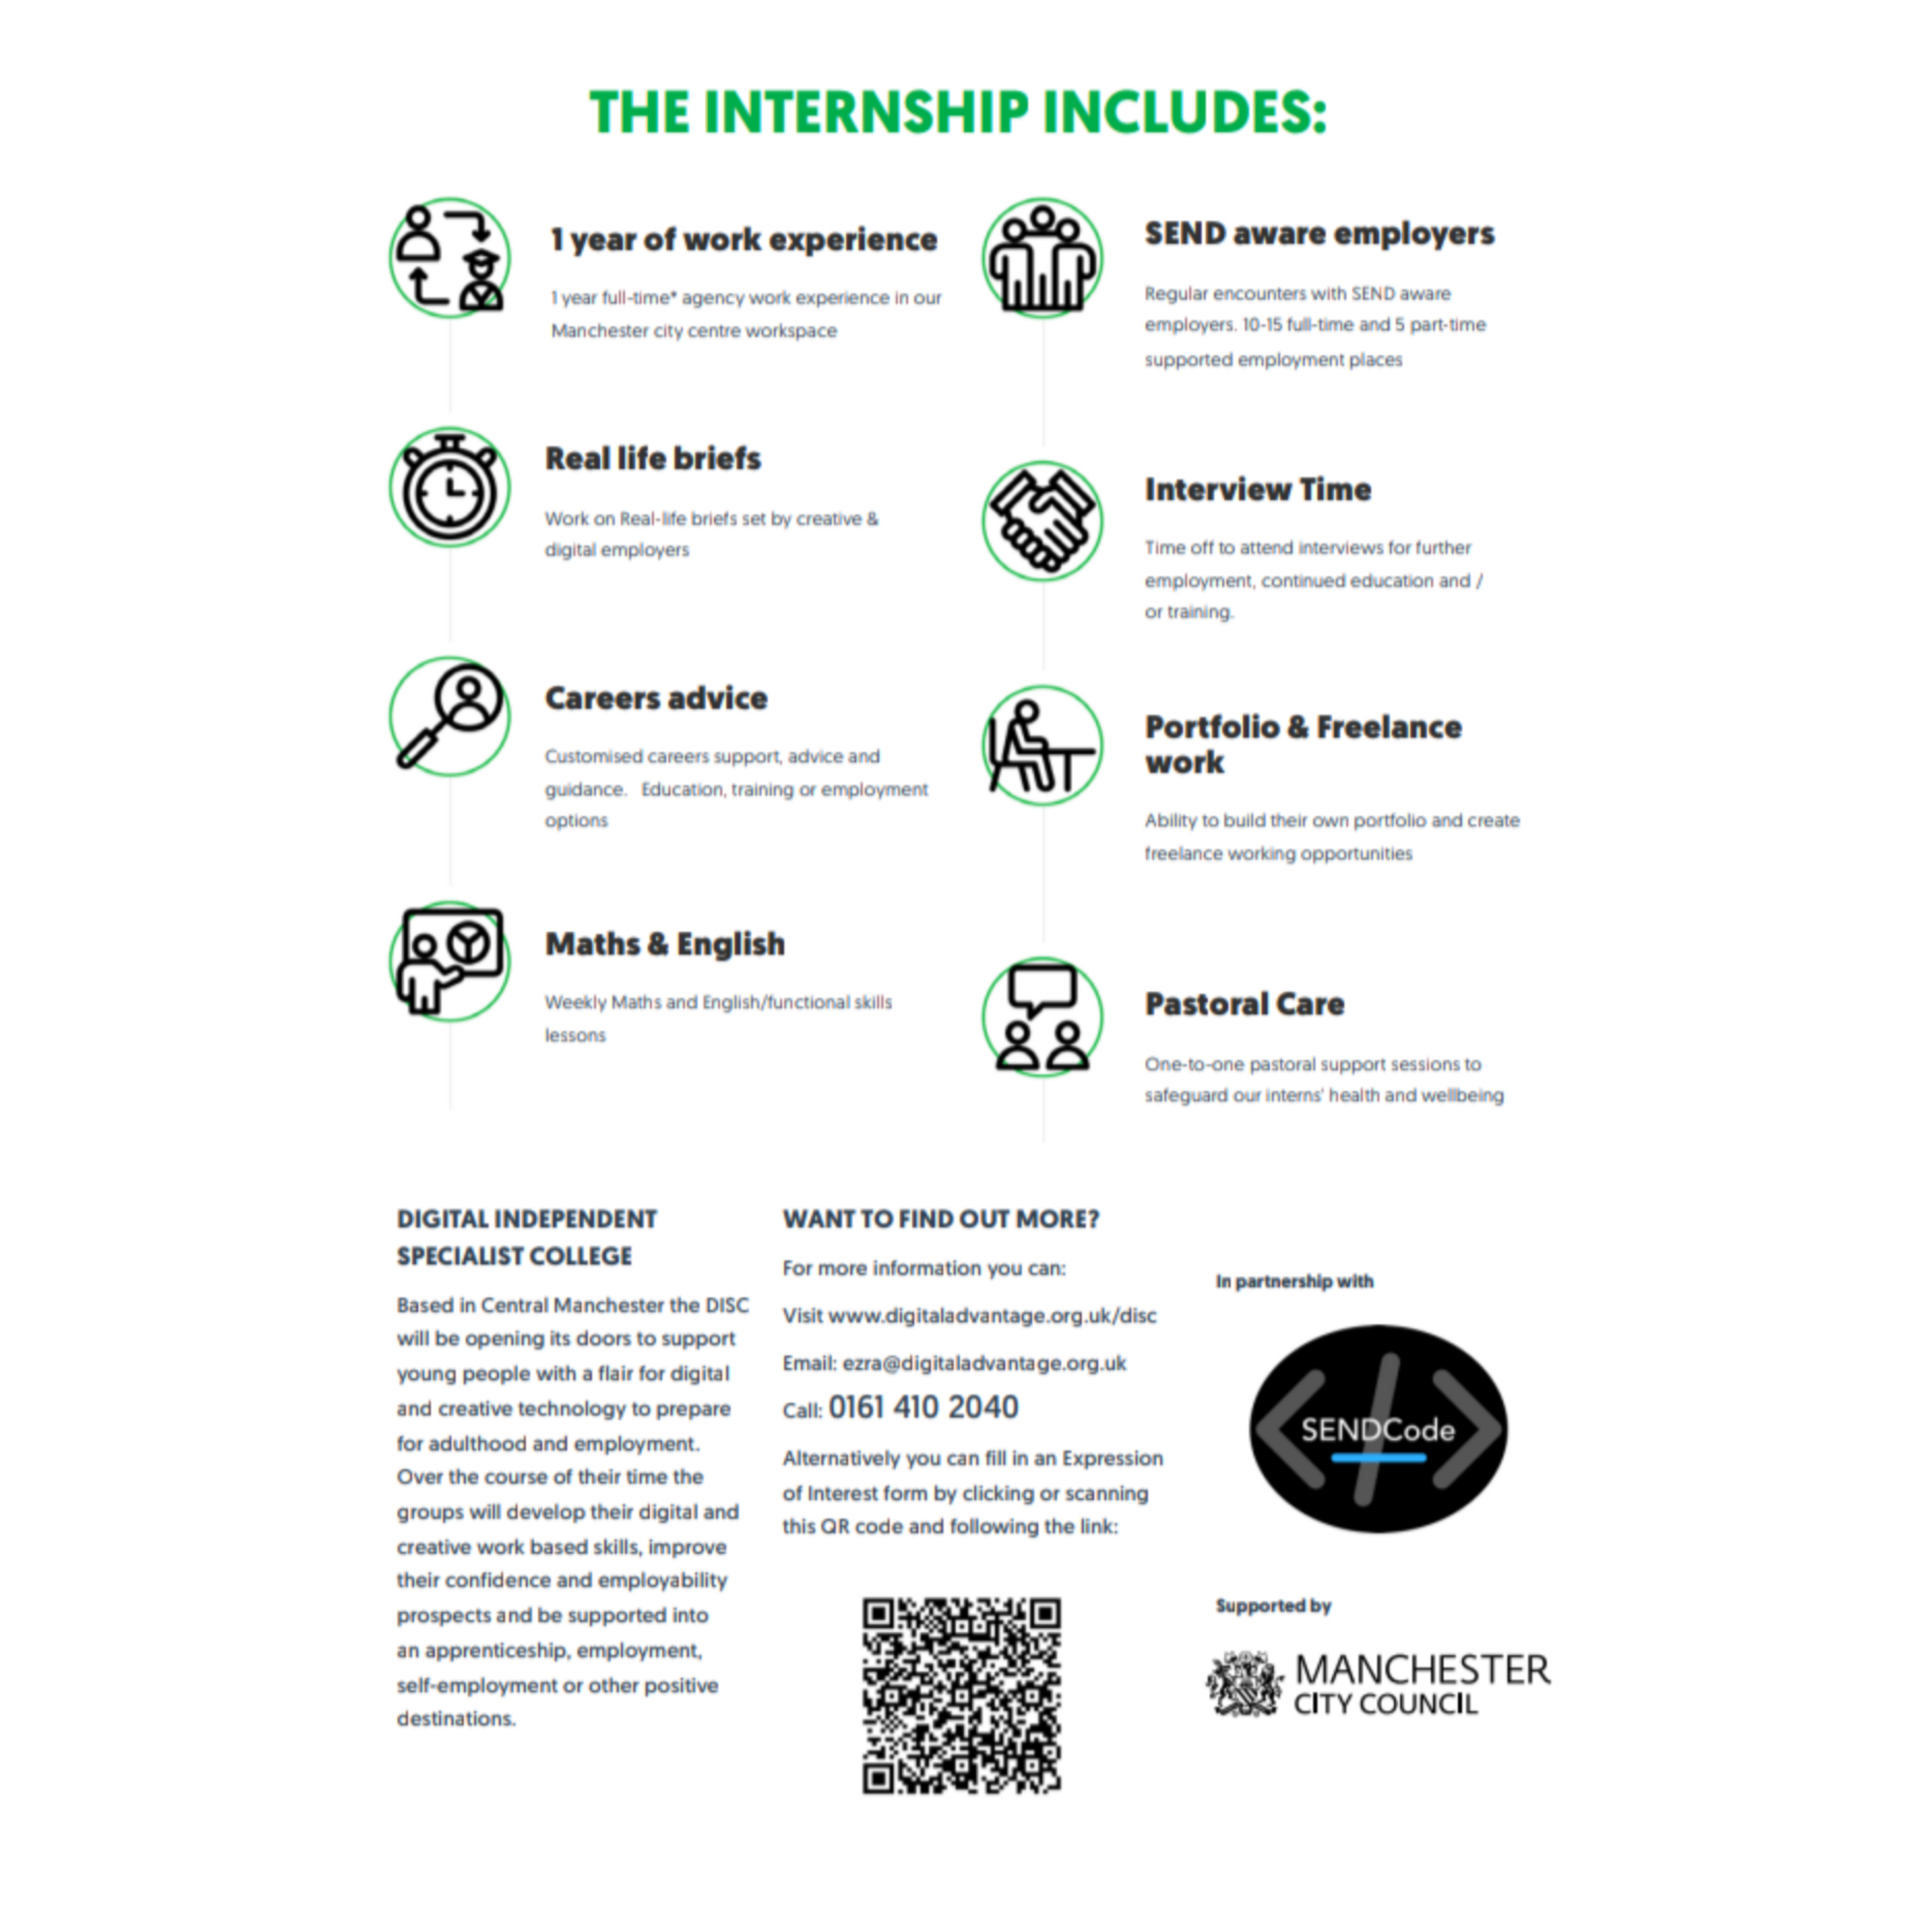 A screenshot of page 2 of the Digital Independent Specialist College (DISC) flyer, showing what the internship includes, contact info and a website link, a QR code for the expression of interest form, and SEND Code's and Manchester City Council's logos